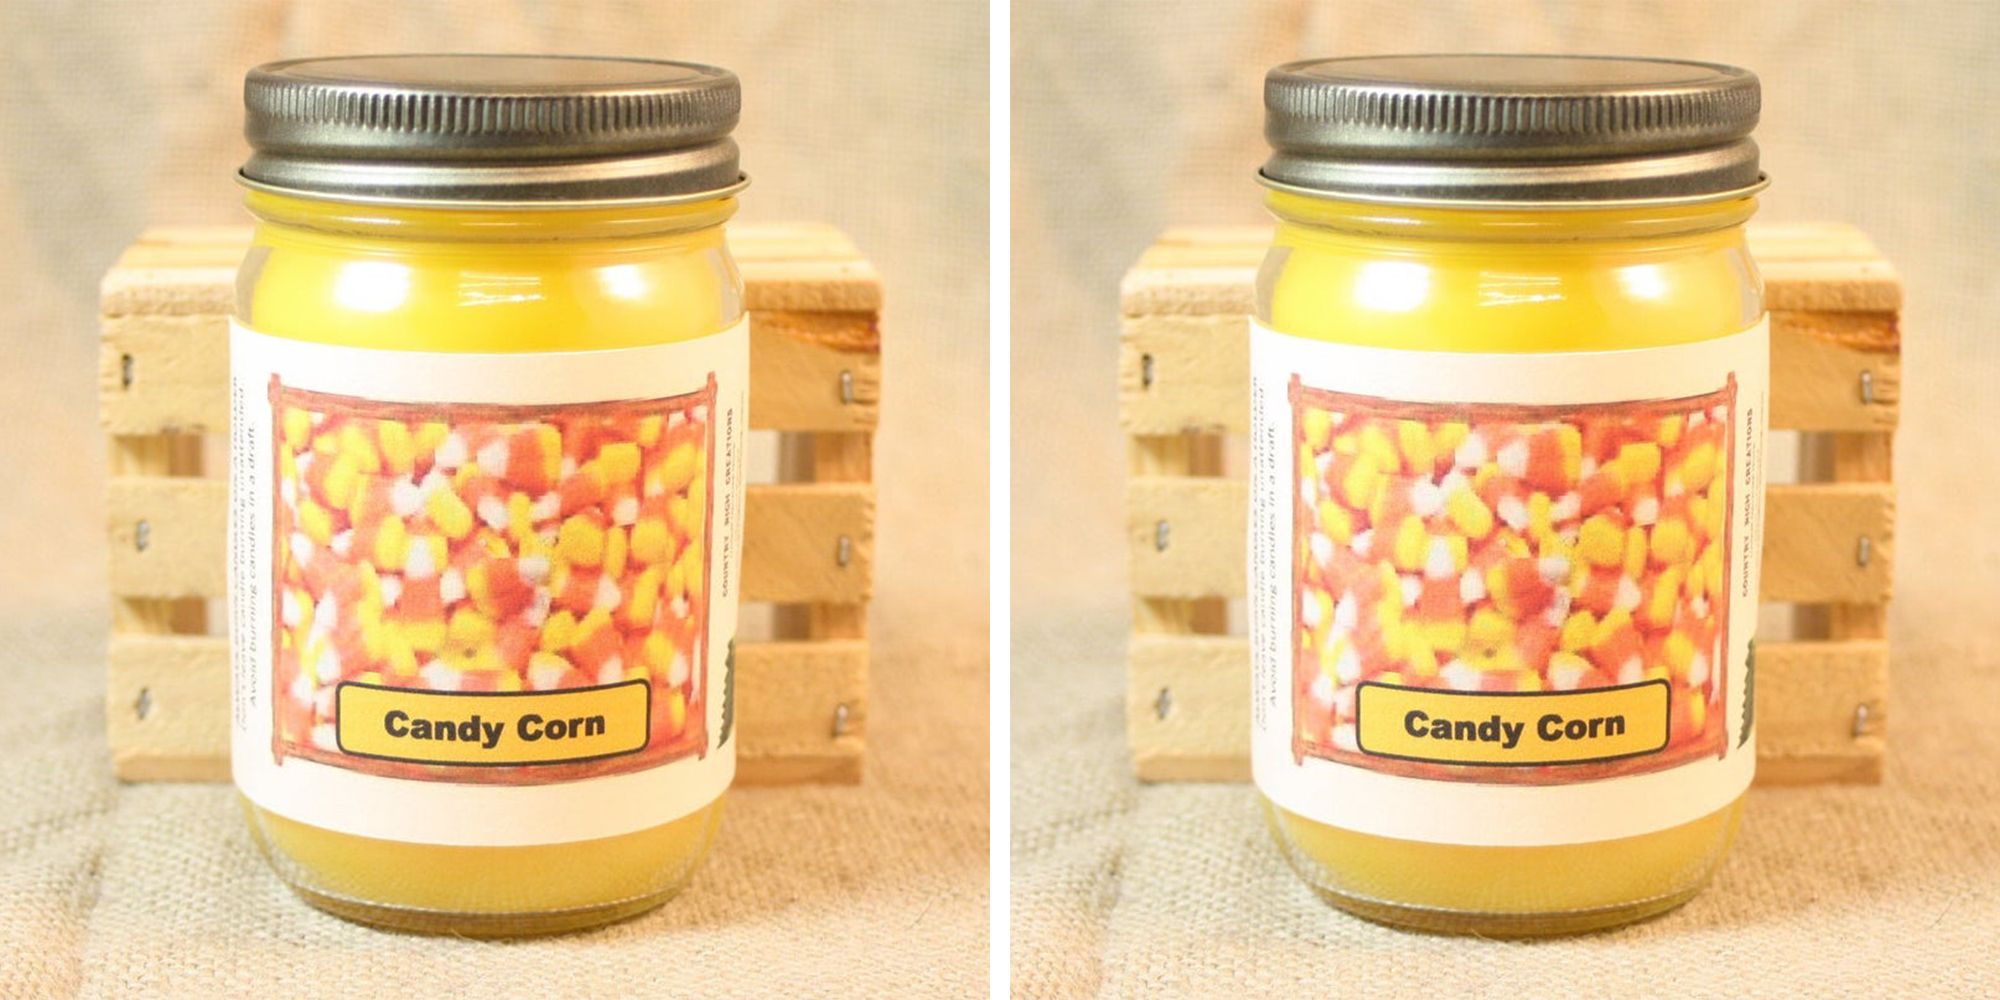 This Candle Smells Just Like Candy Corn, So Light It Up on Halloween